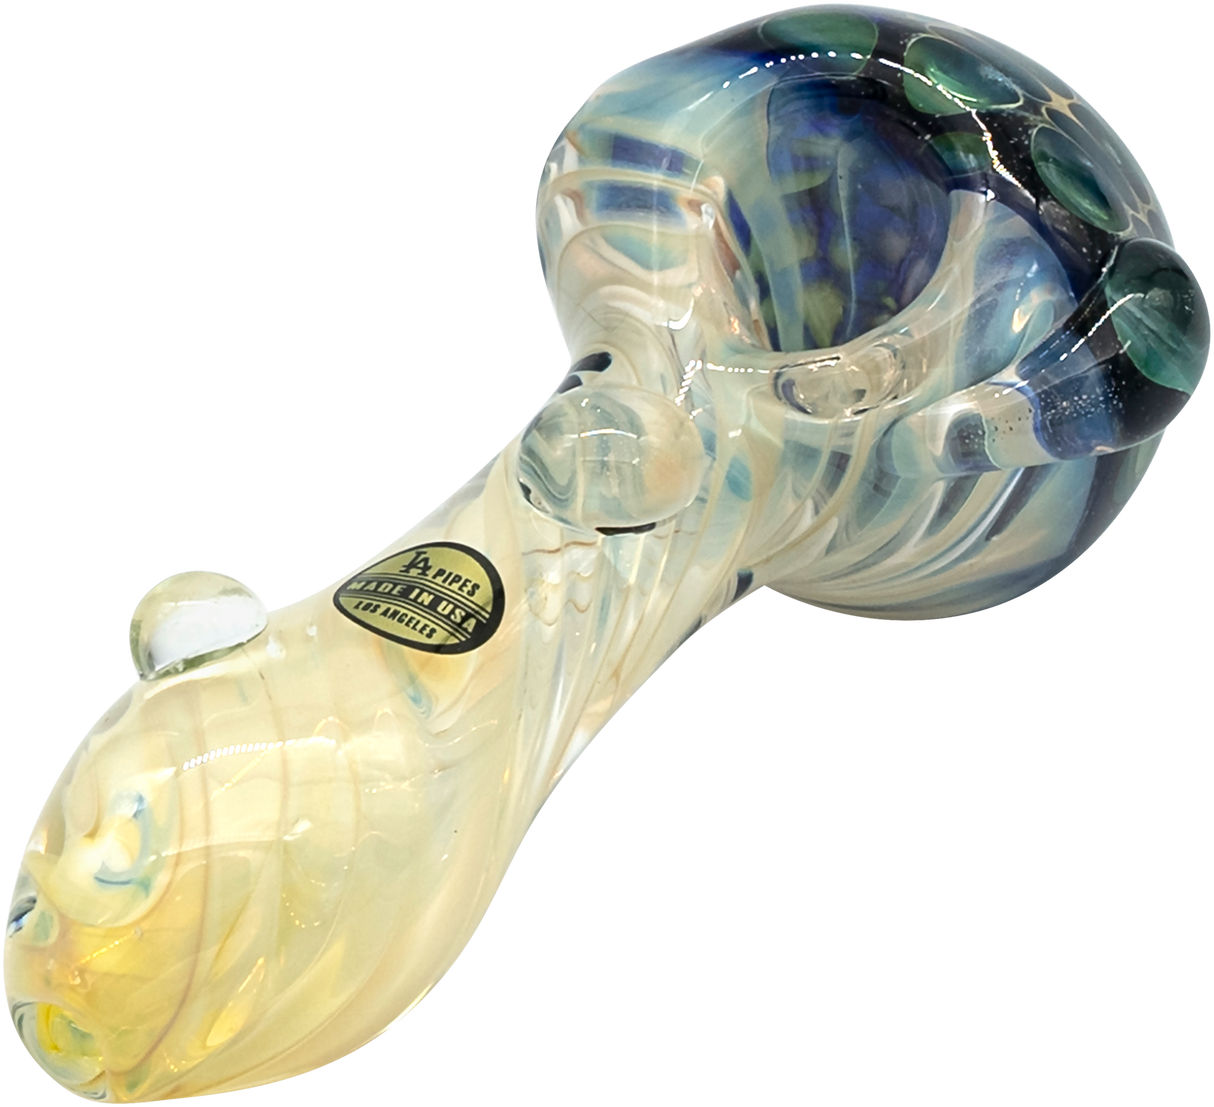 LA Pipes "The Hive" Honeycomb Spoon Pipe, 4" Fumed Color Changing Glass